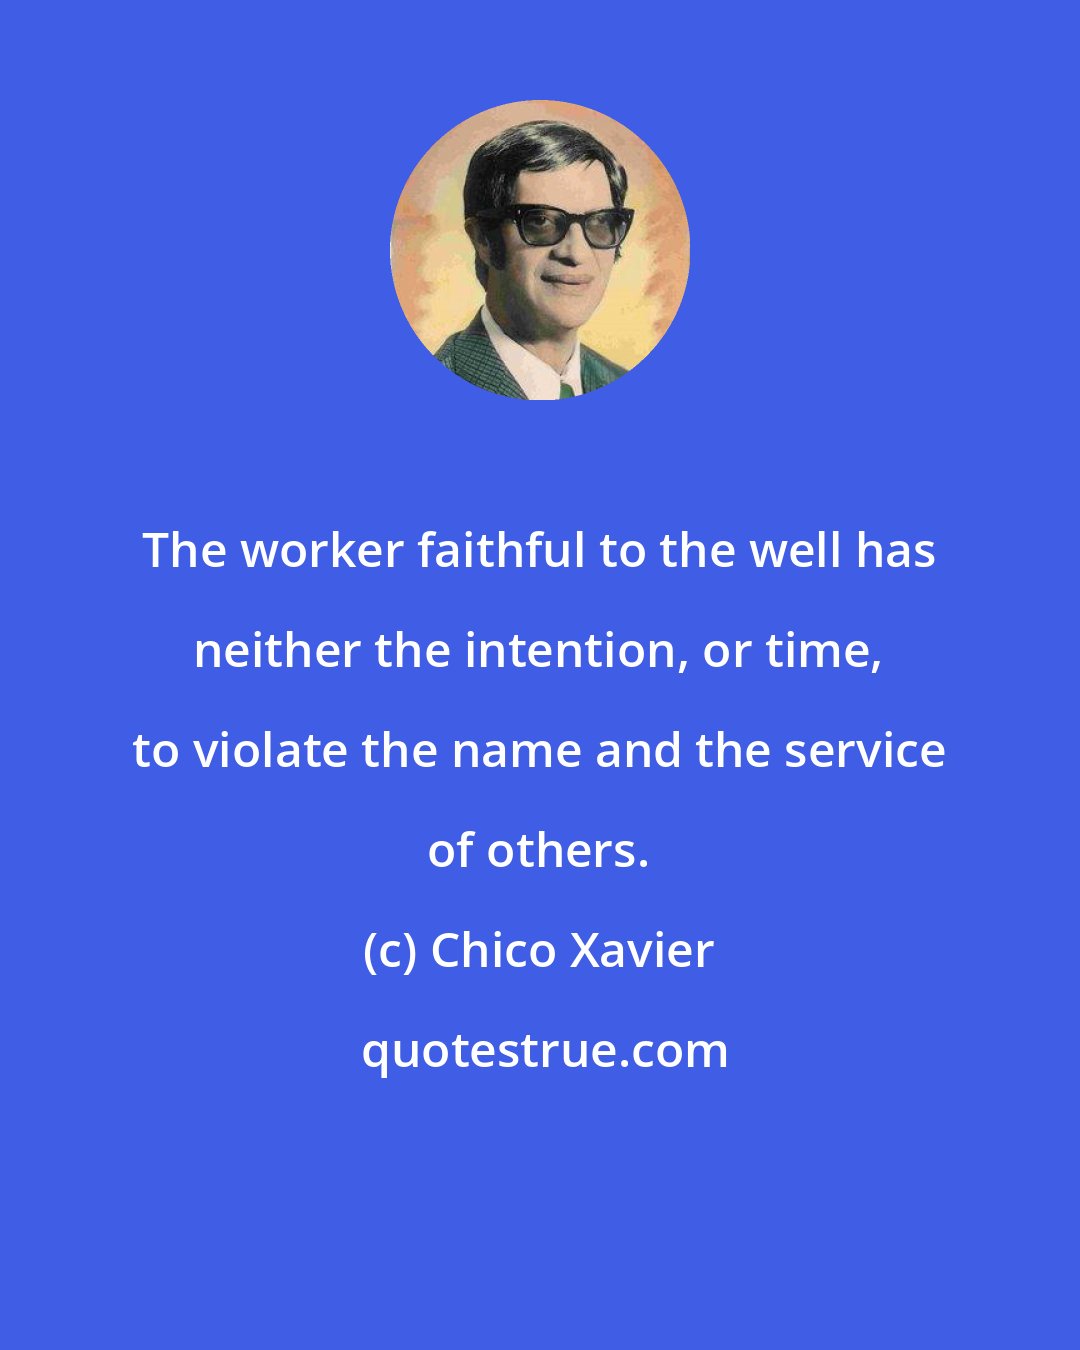 Chico Xavier: The worker faithful to the well has neither the intention, or time, to violate the name and the service of others.